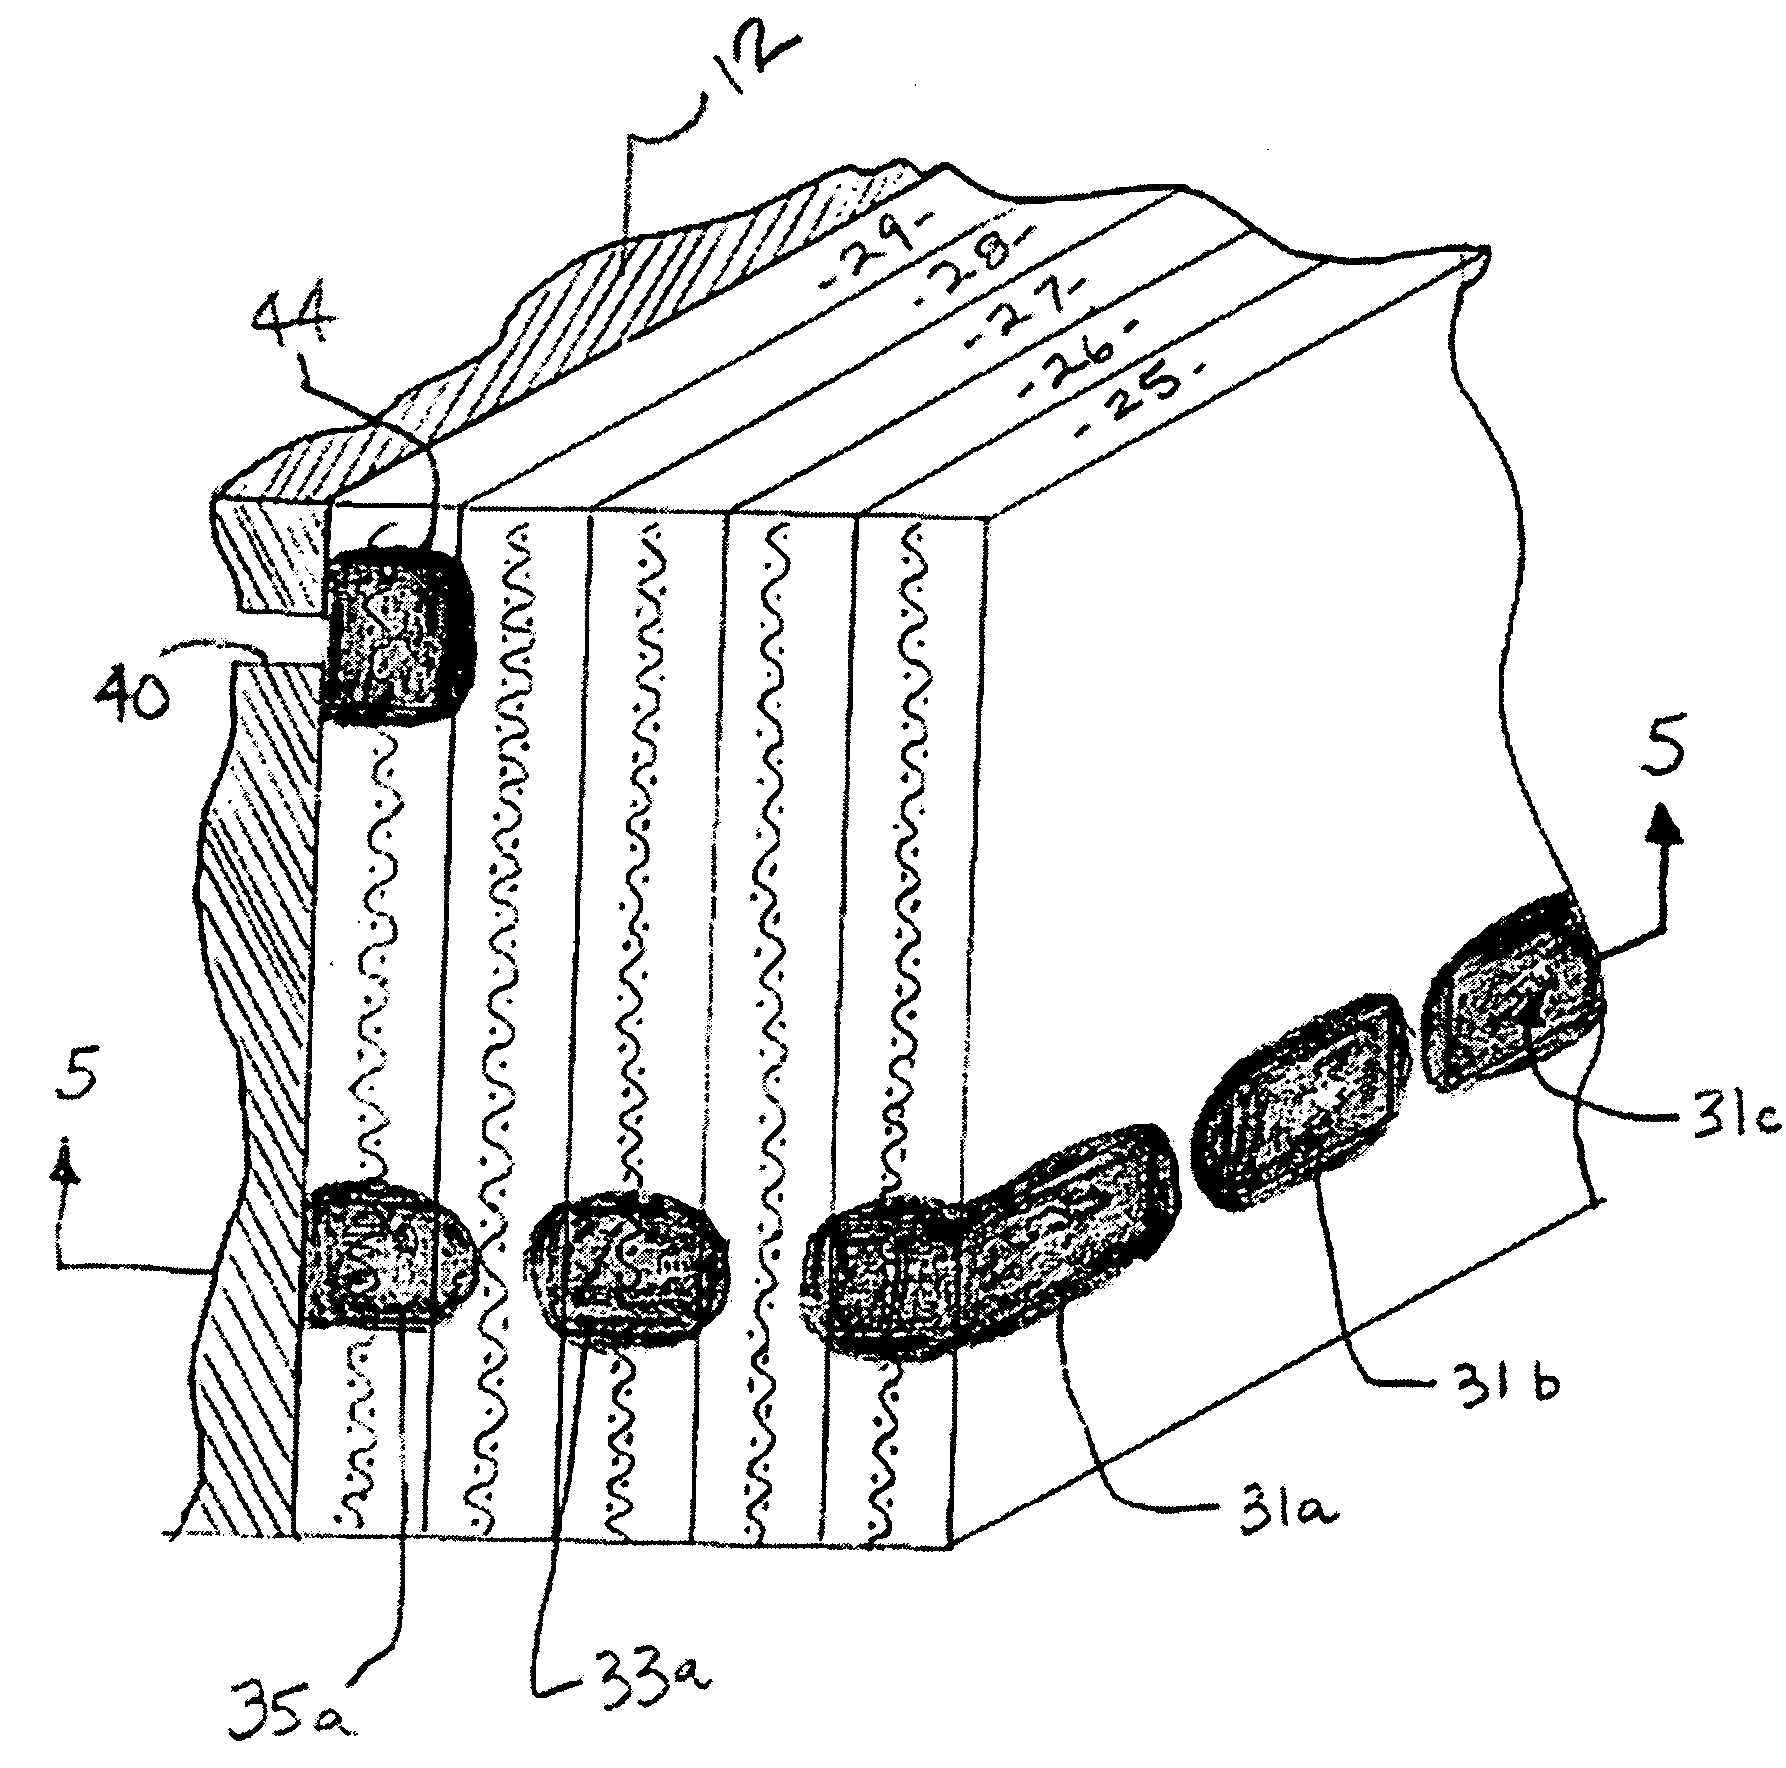 Control of resin flow during molding of composite articles